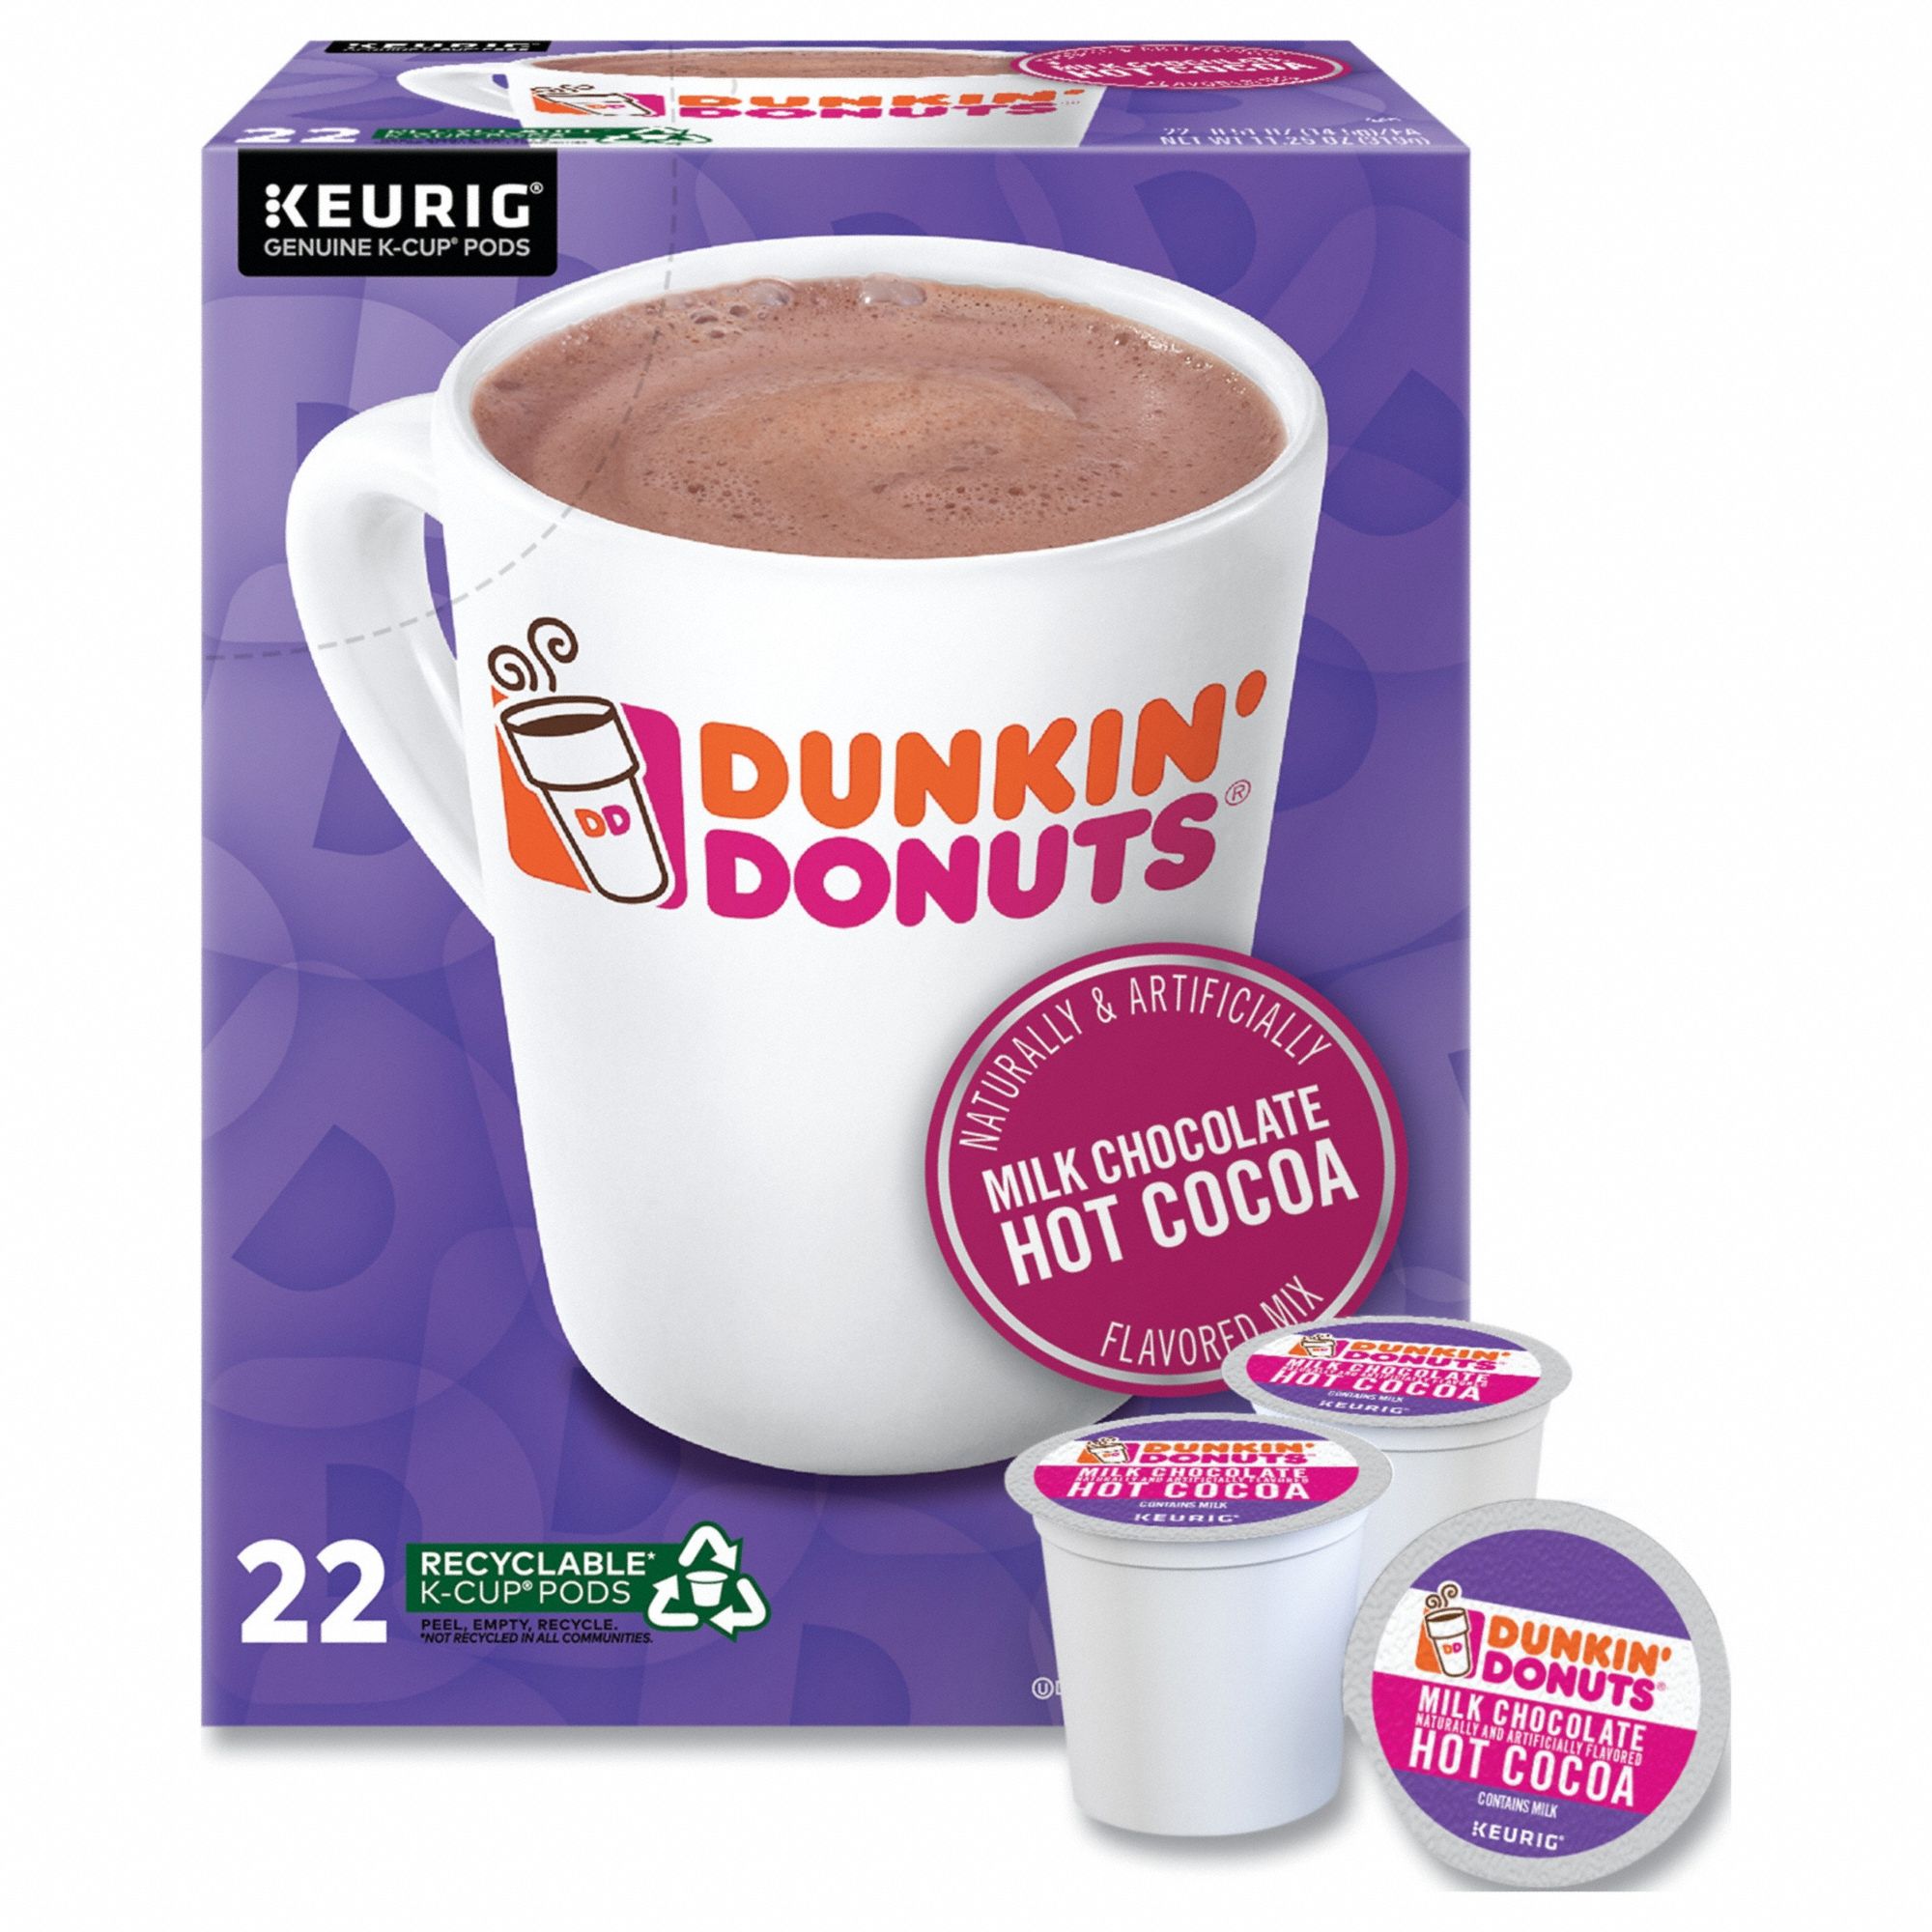 Hot Cocoa K-Cup: Non-Caffeinated, Milk Chocolate, Pod, 0.51 oz Pack Wt, Ground, 22 PK